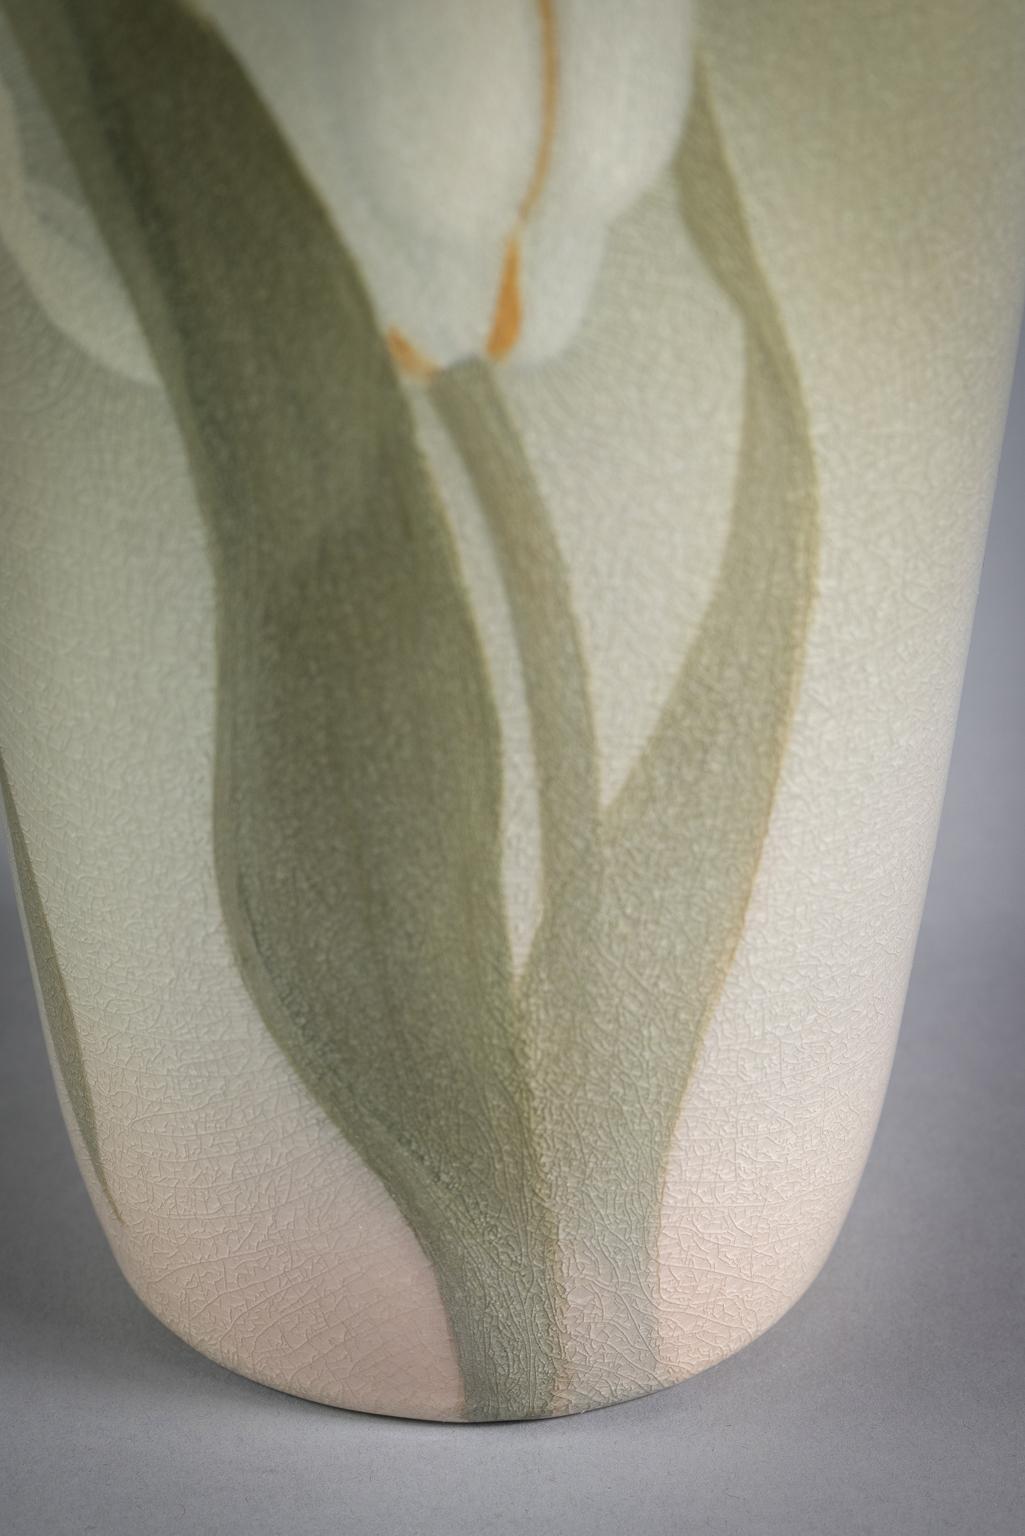 Early 20th Century Rookwood Iris-Glazed Vase, Dated 1903 For Sale